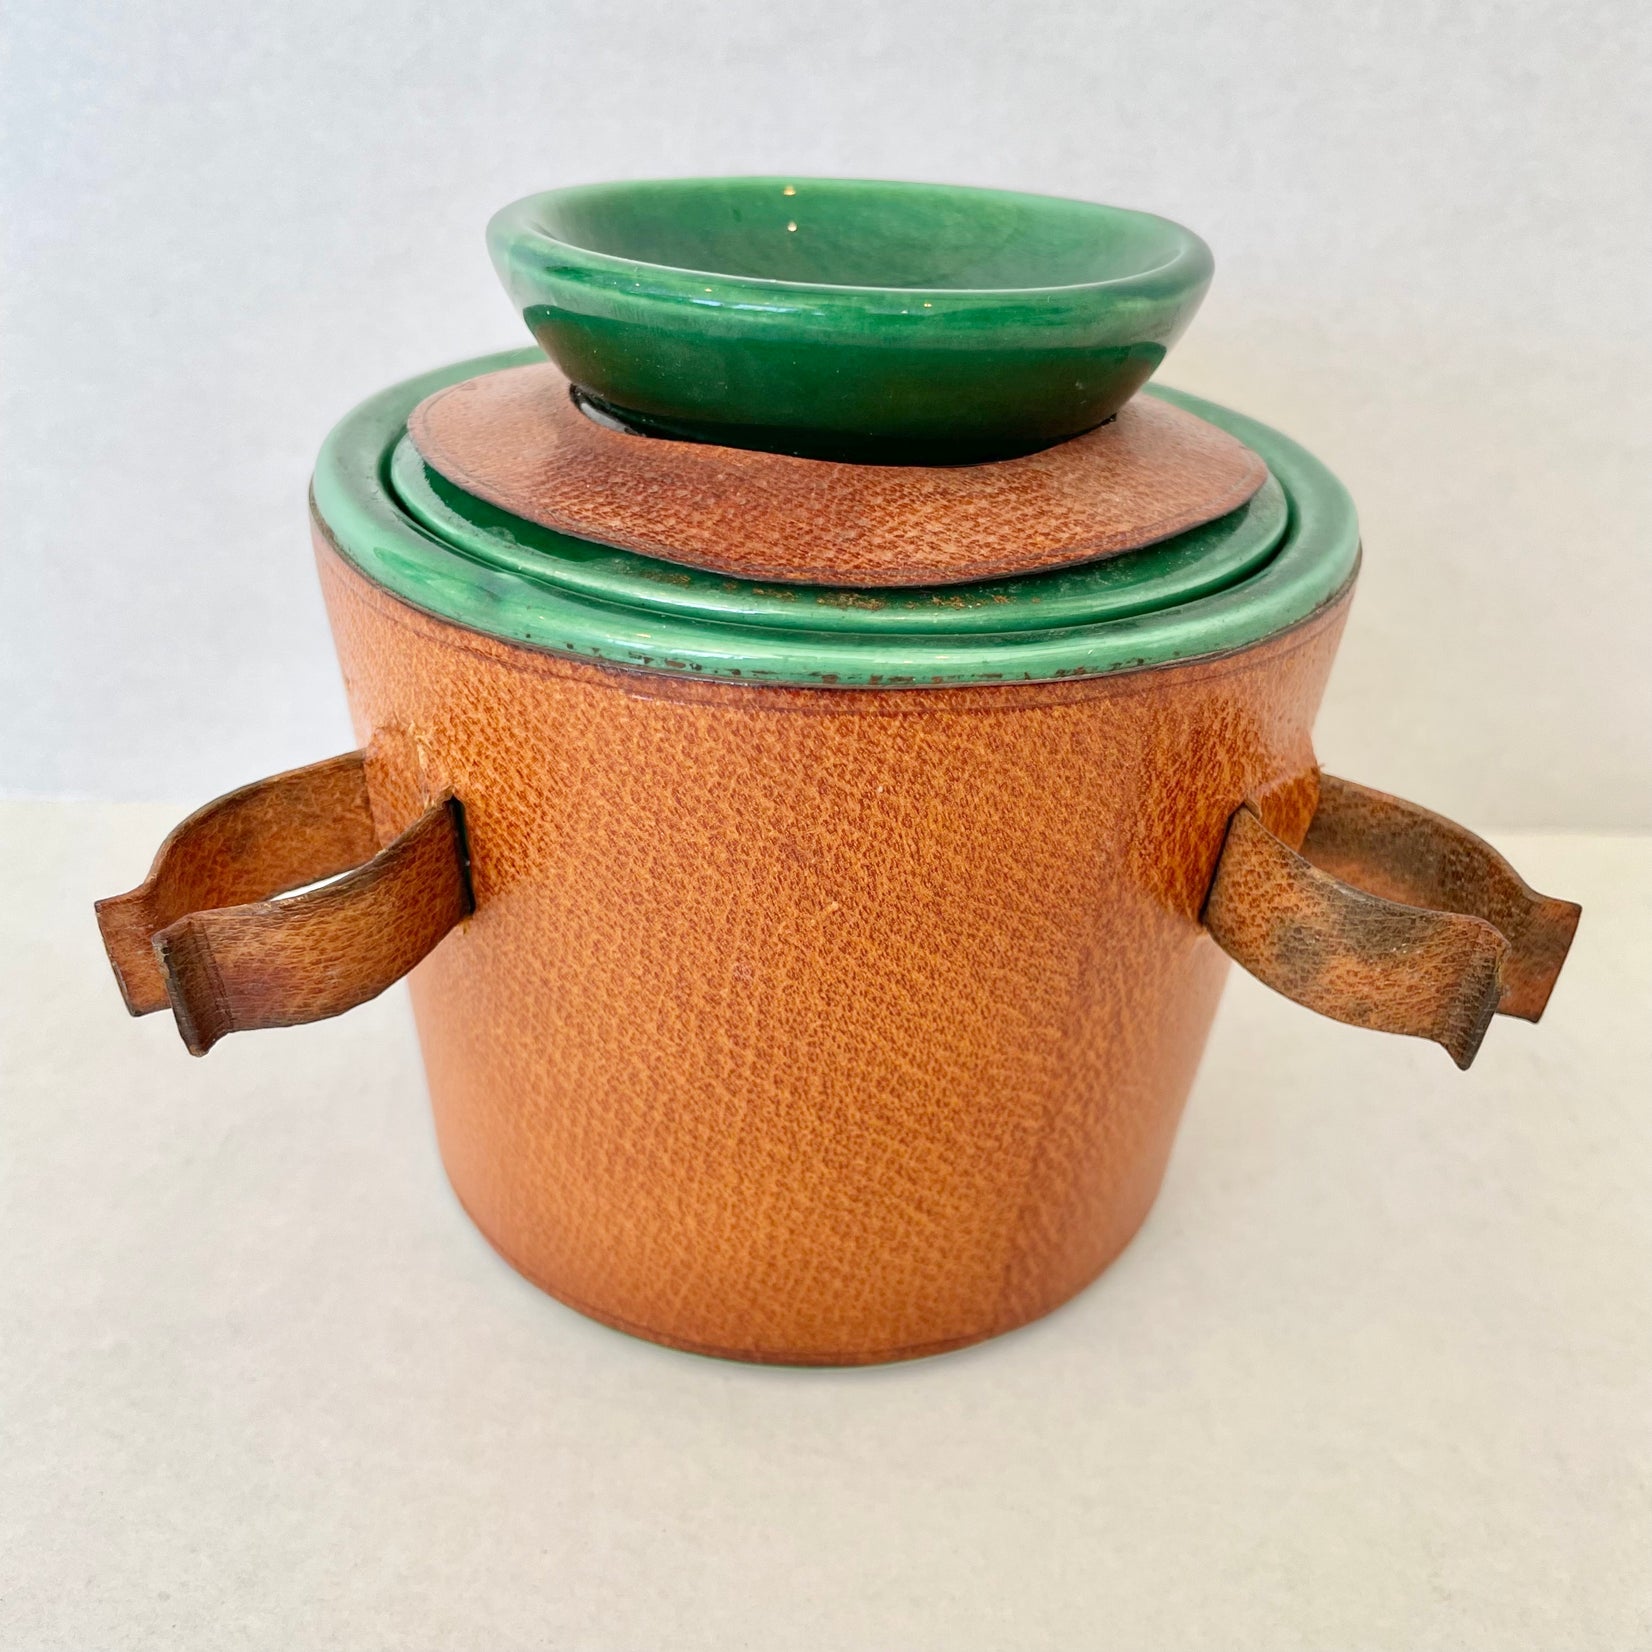 Leather and Ceramic Tobacco Jar by Longchamp